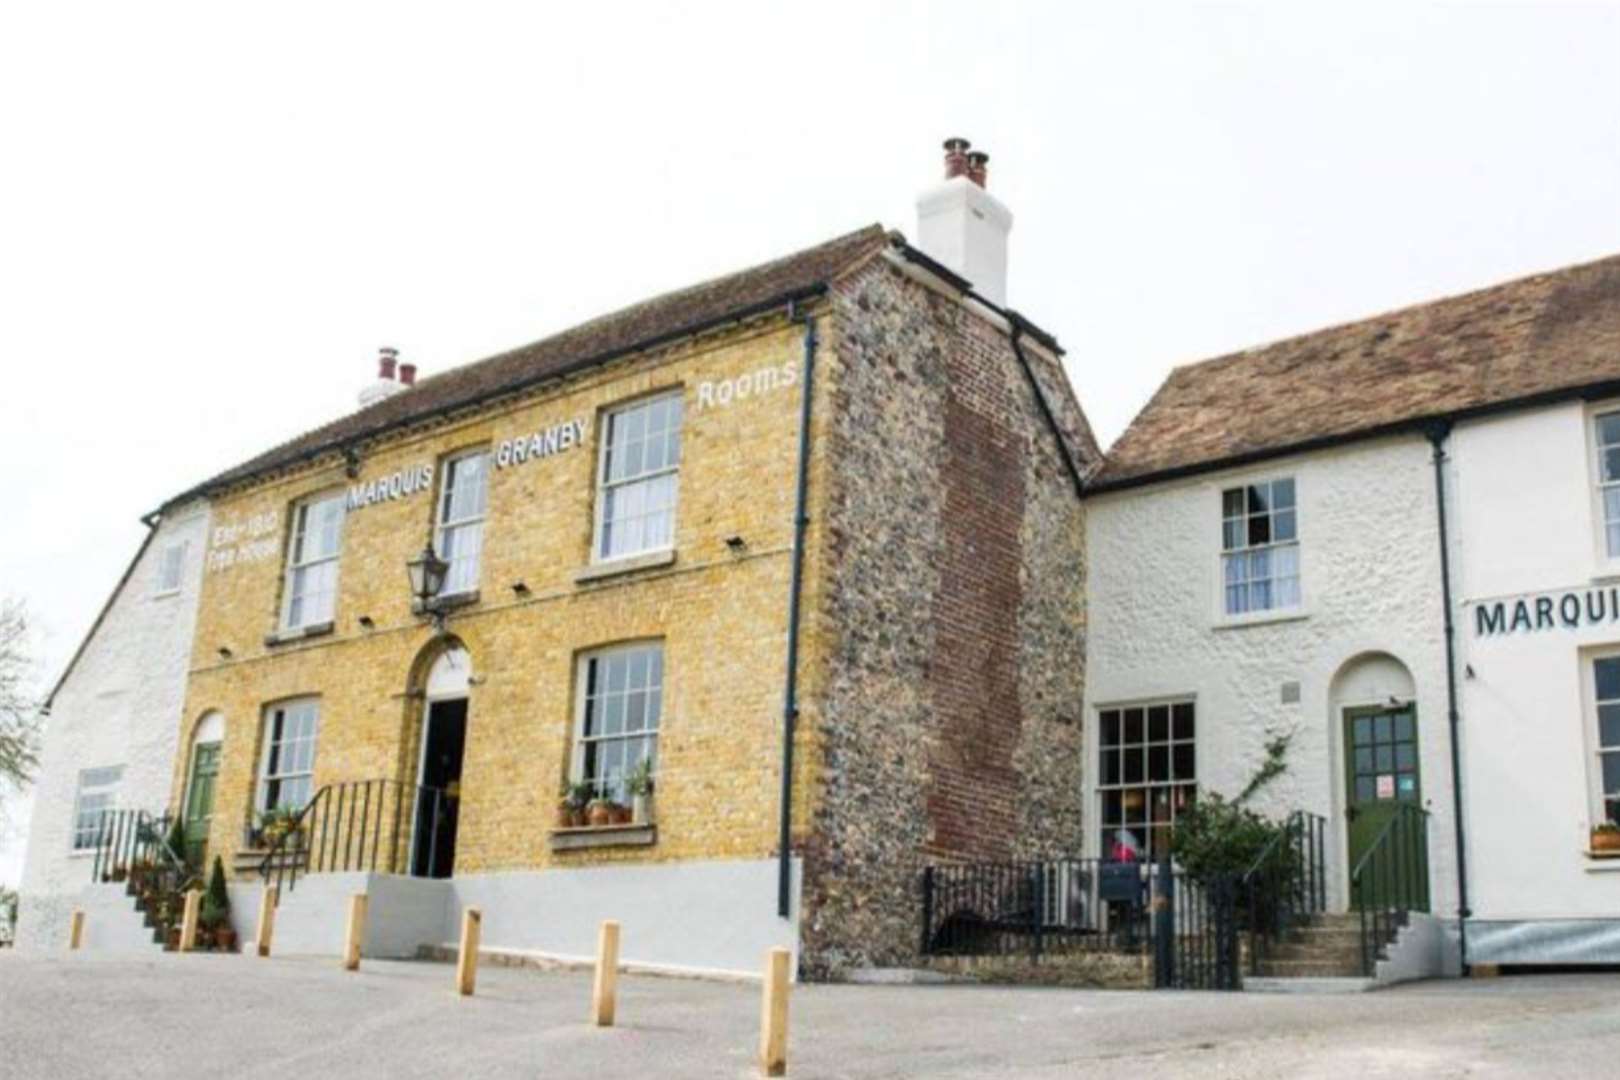 The Marquis of Granby in Alkham, near Dover, has been named the best pub in Kent for 2023